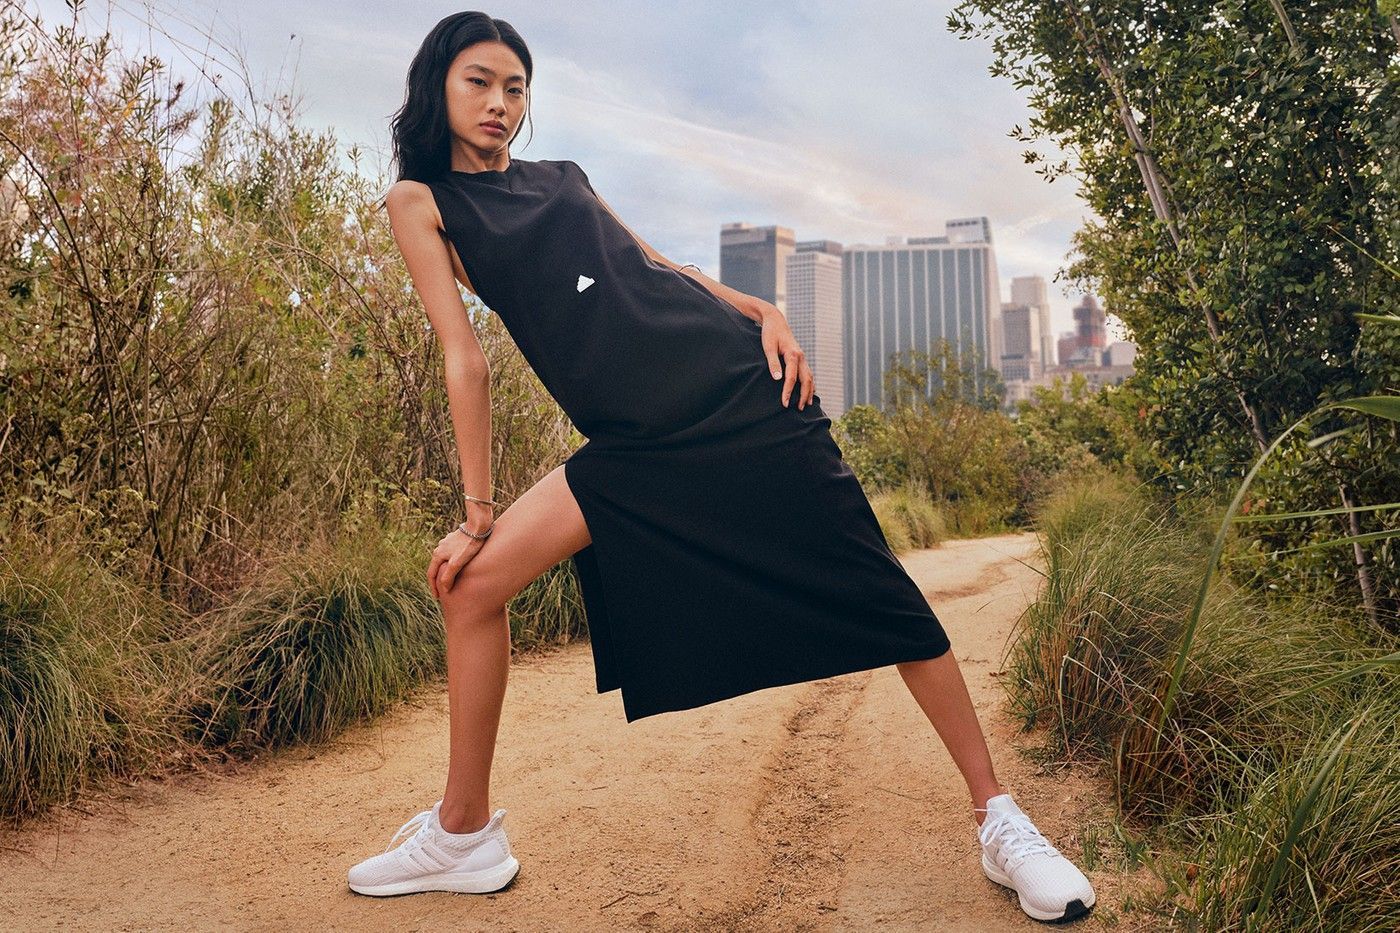 Squid Game Star Ho Yeon Jung Fronts New Adidas Campaign - PAPER Magazine